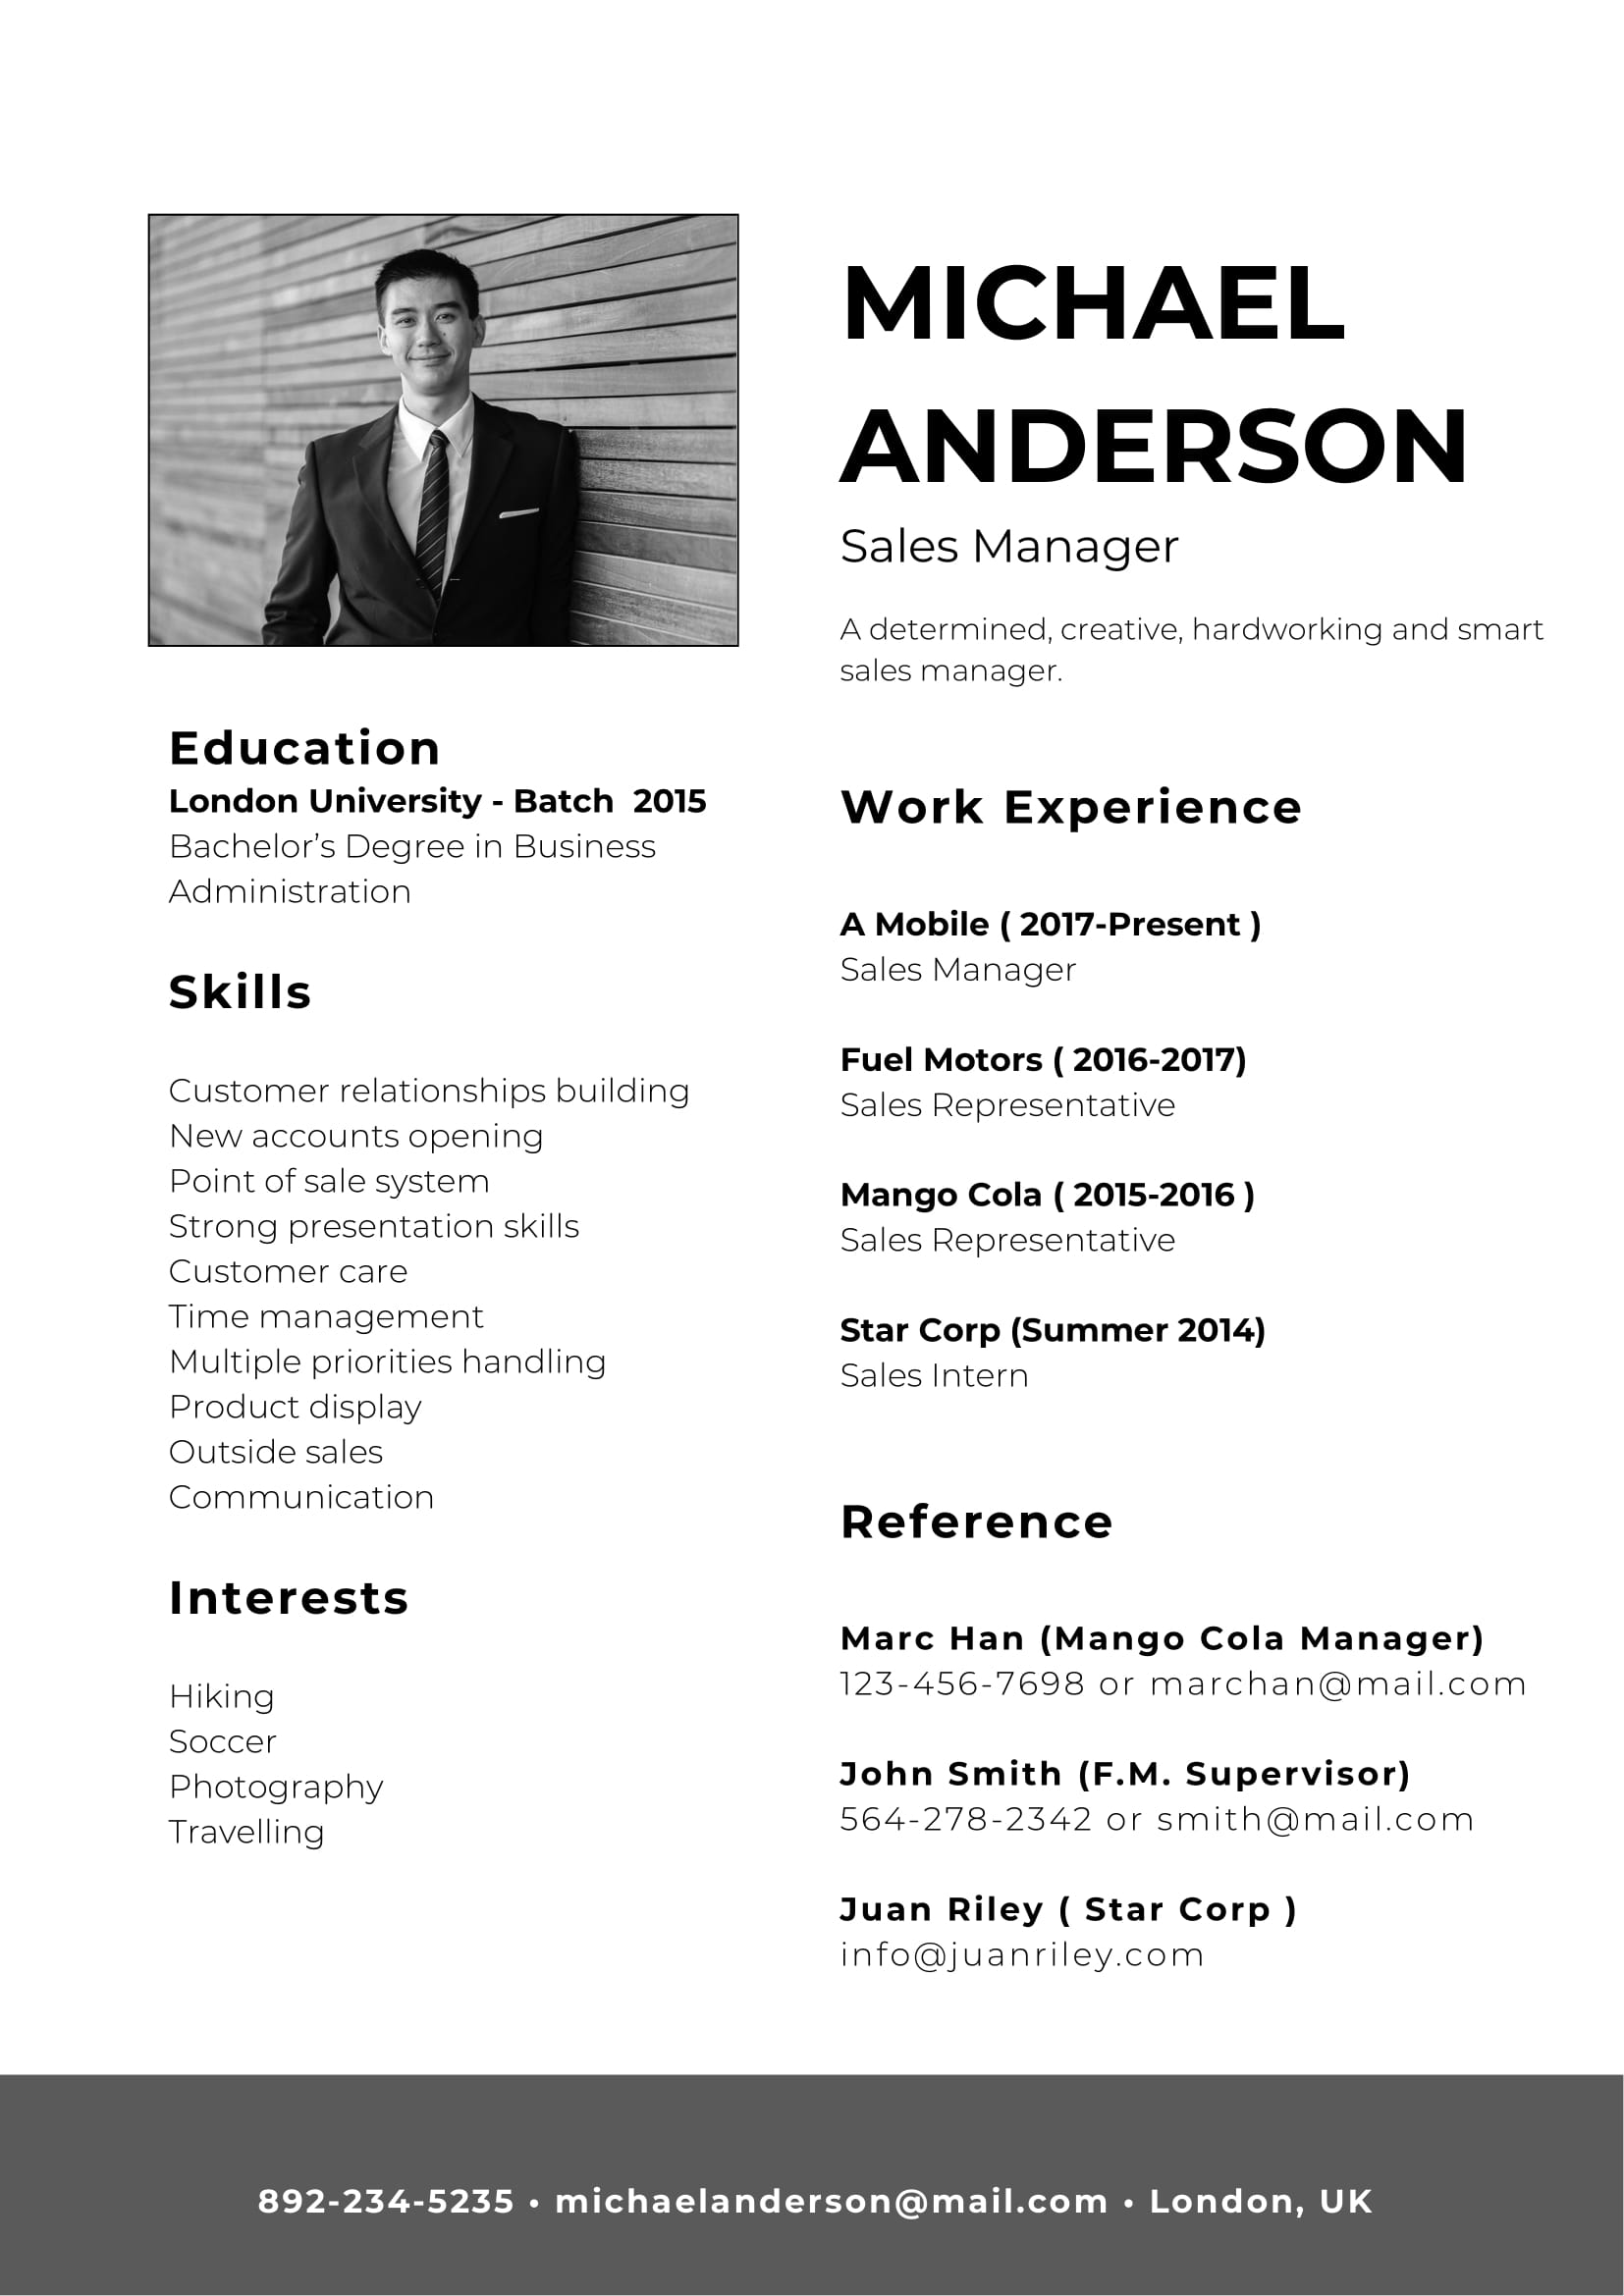 free professional sales resume template